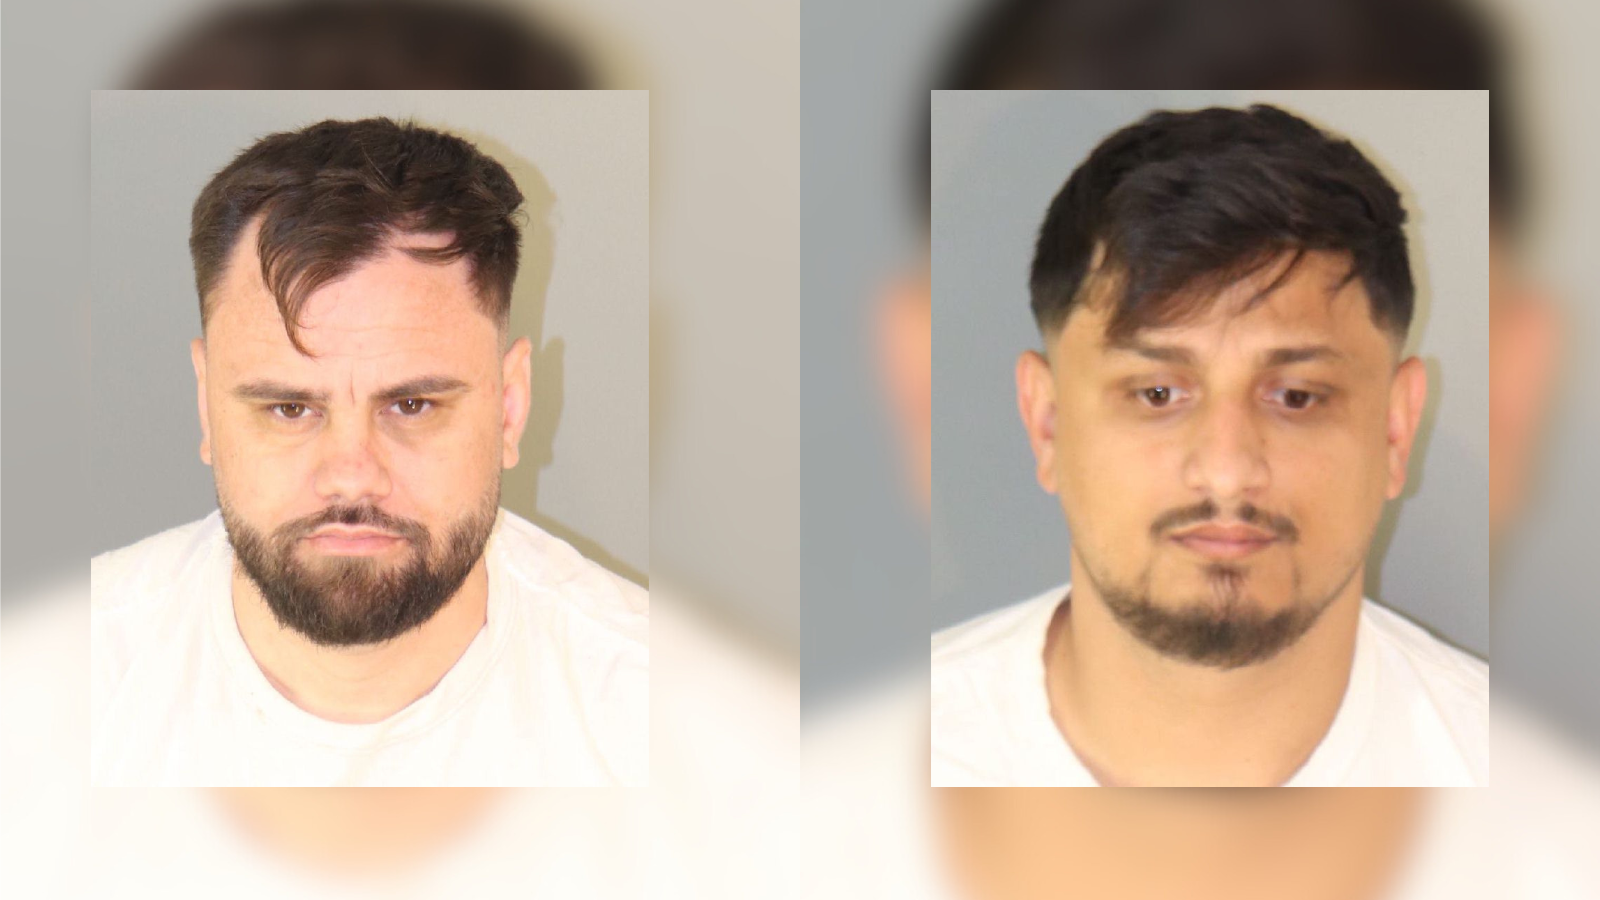 Two people arrested for skimming fraud in Riverside